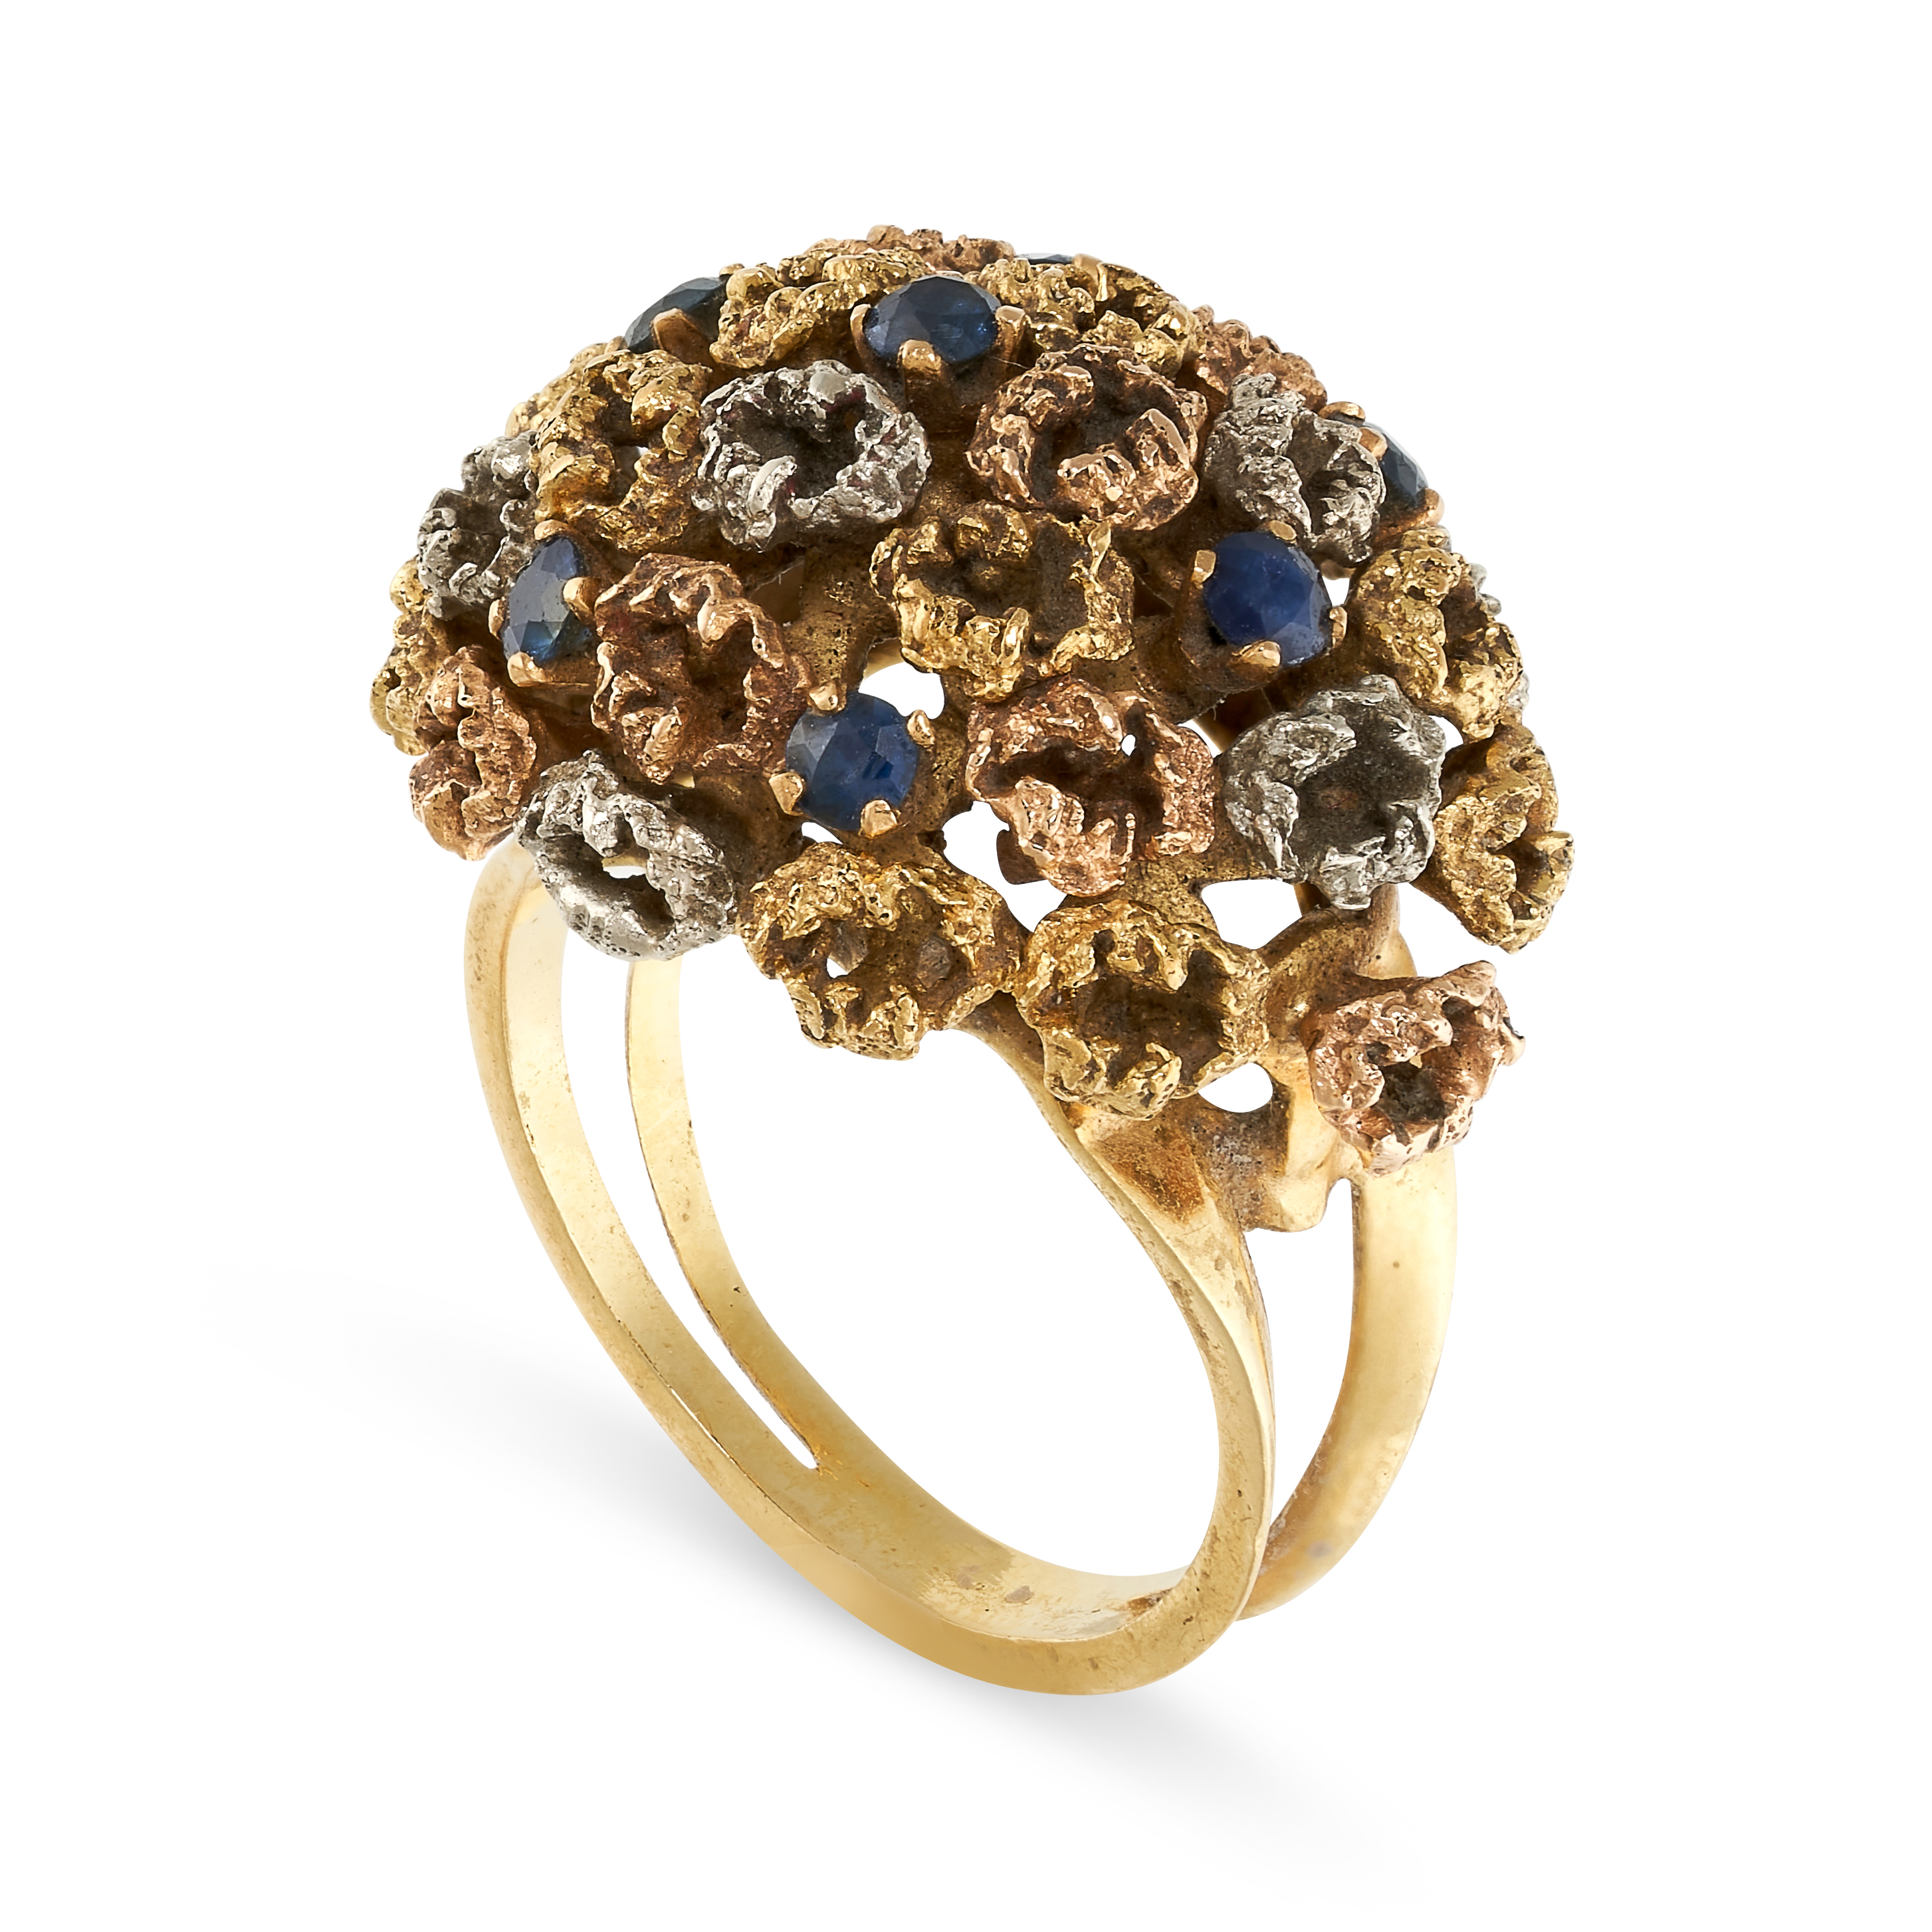 NO RESERVE - A VINTAGE SAPPHIRE BOMBE DRESS RING, CIRCA 1960  Made in 18 carat yellow, white and - Image 2 of 2